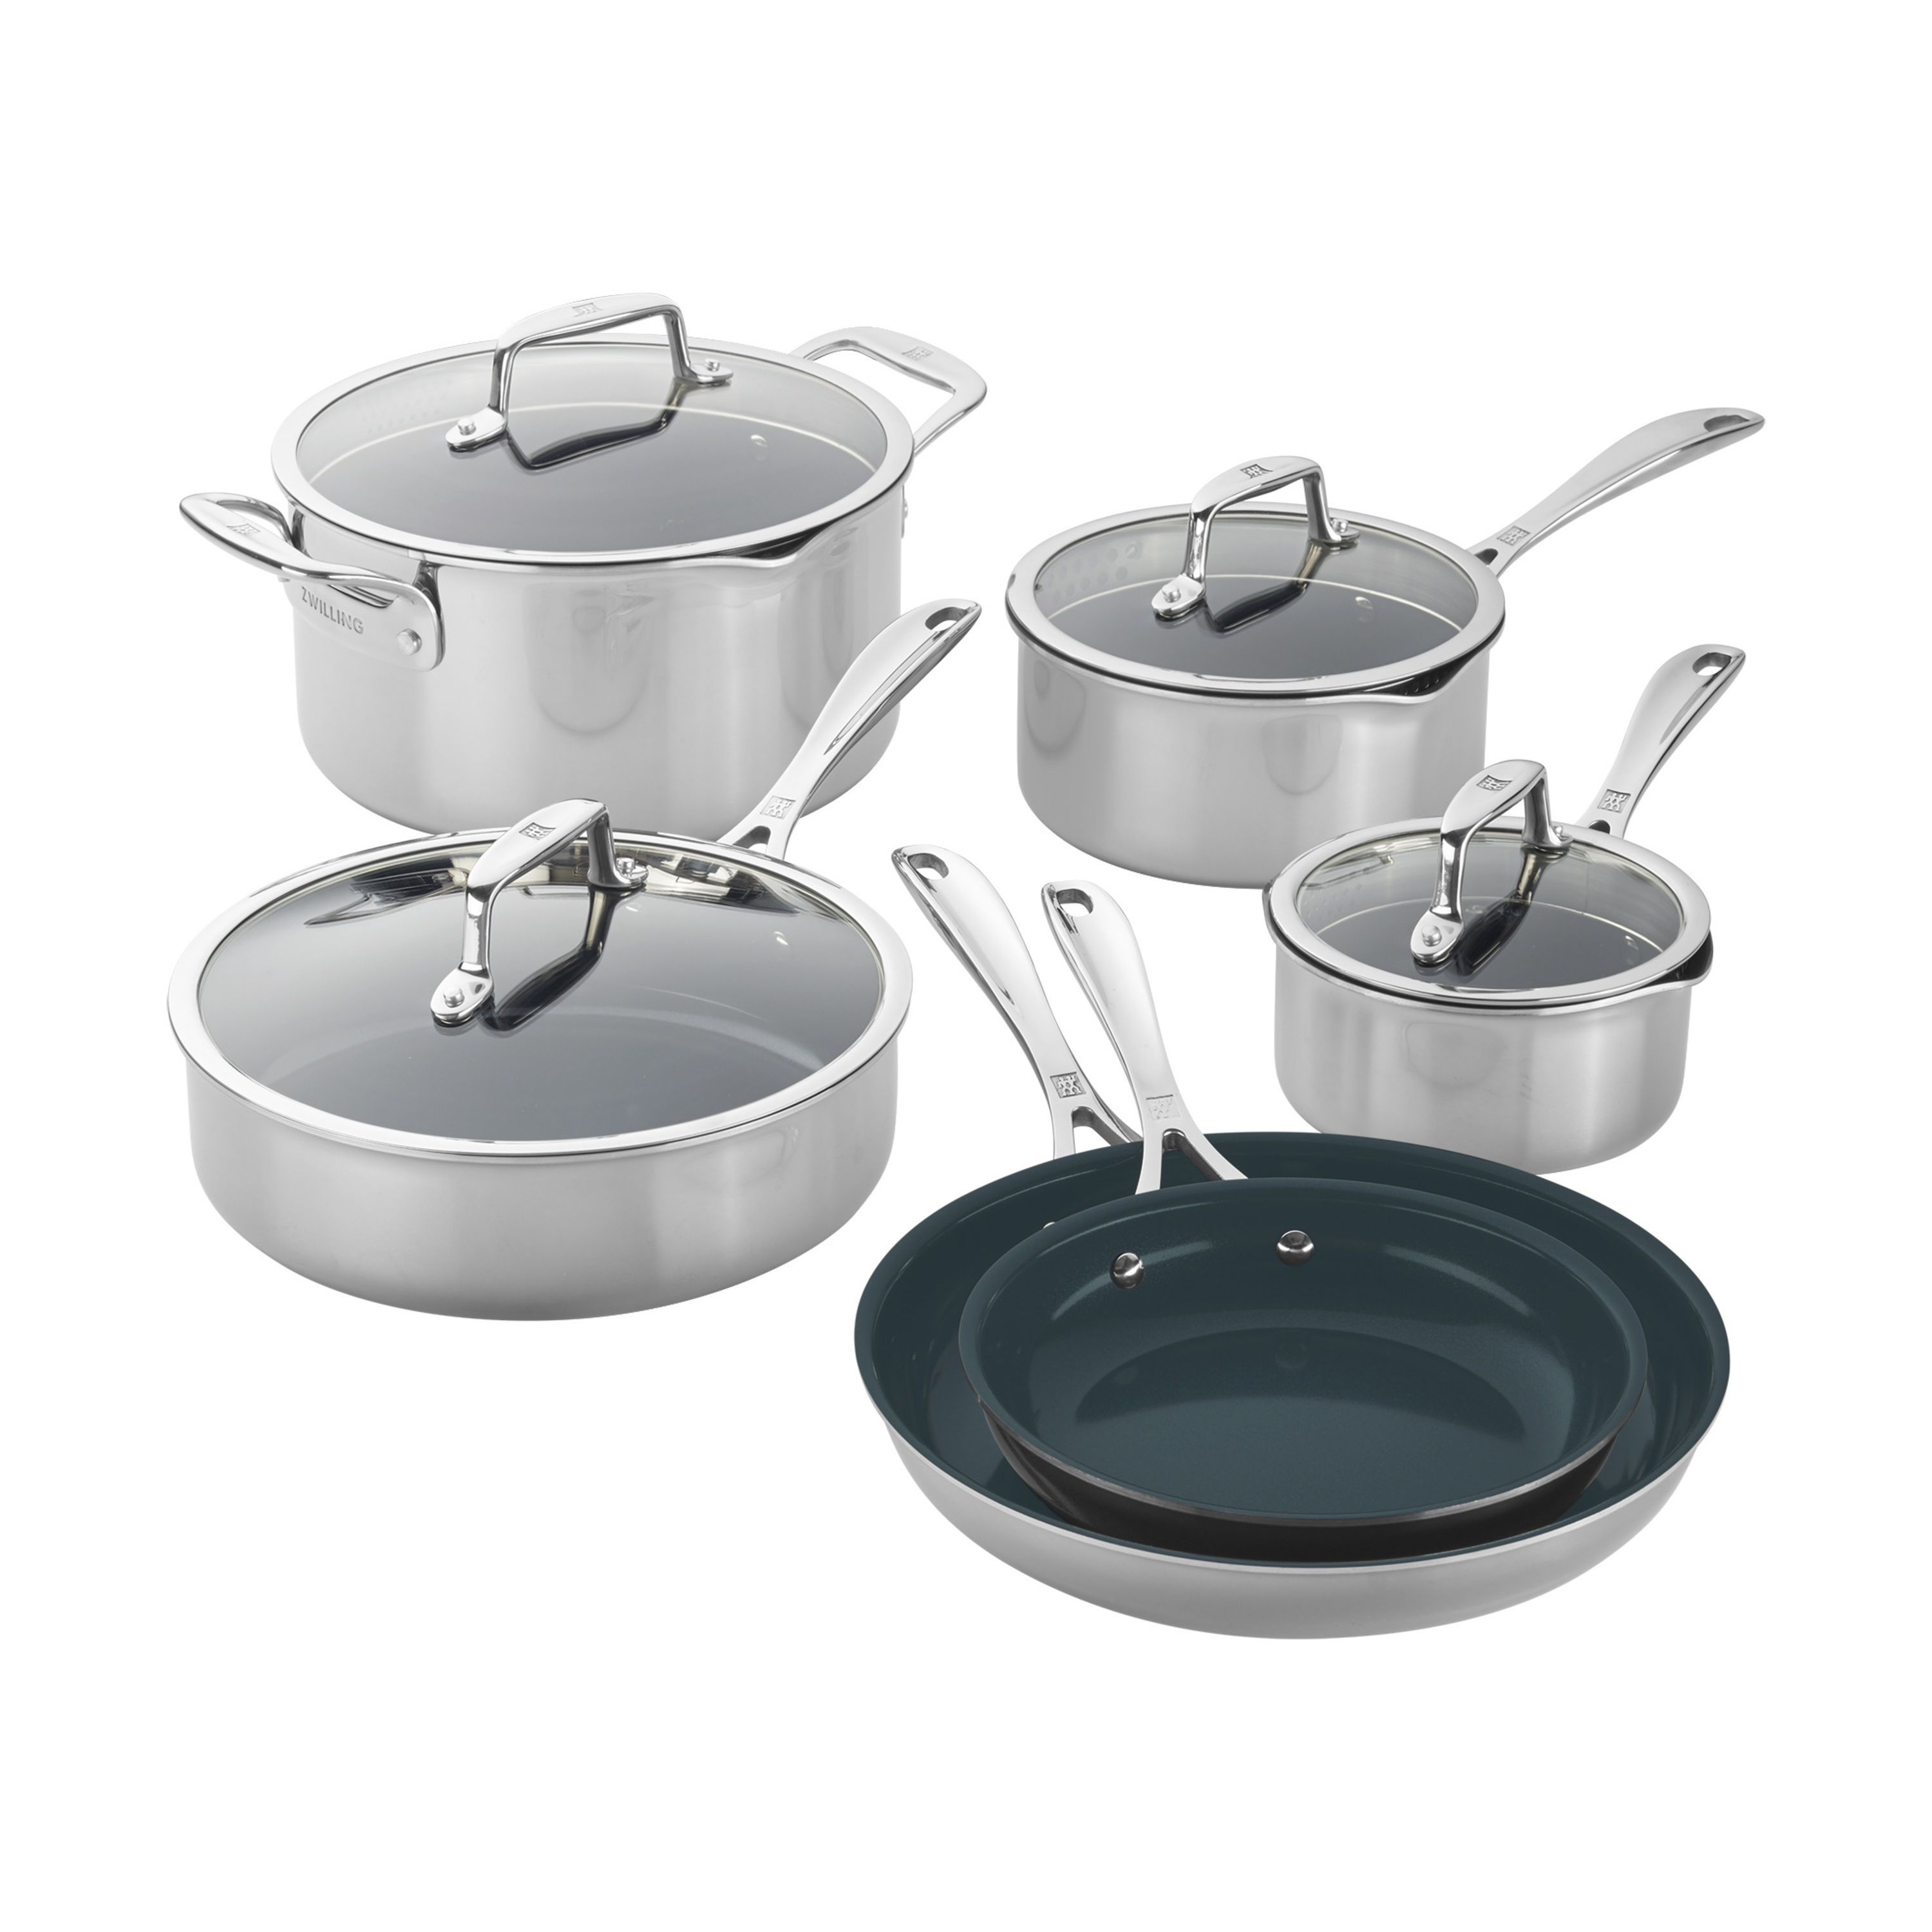 Details about   Cookware Kitchenware Set Stainless Steel kitchen tools accessories